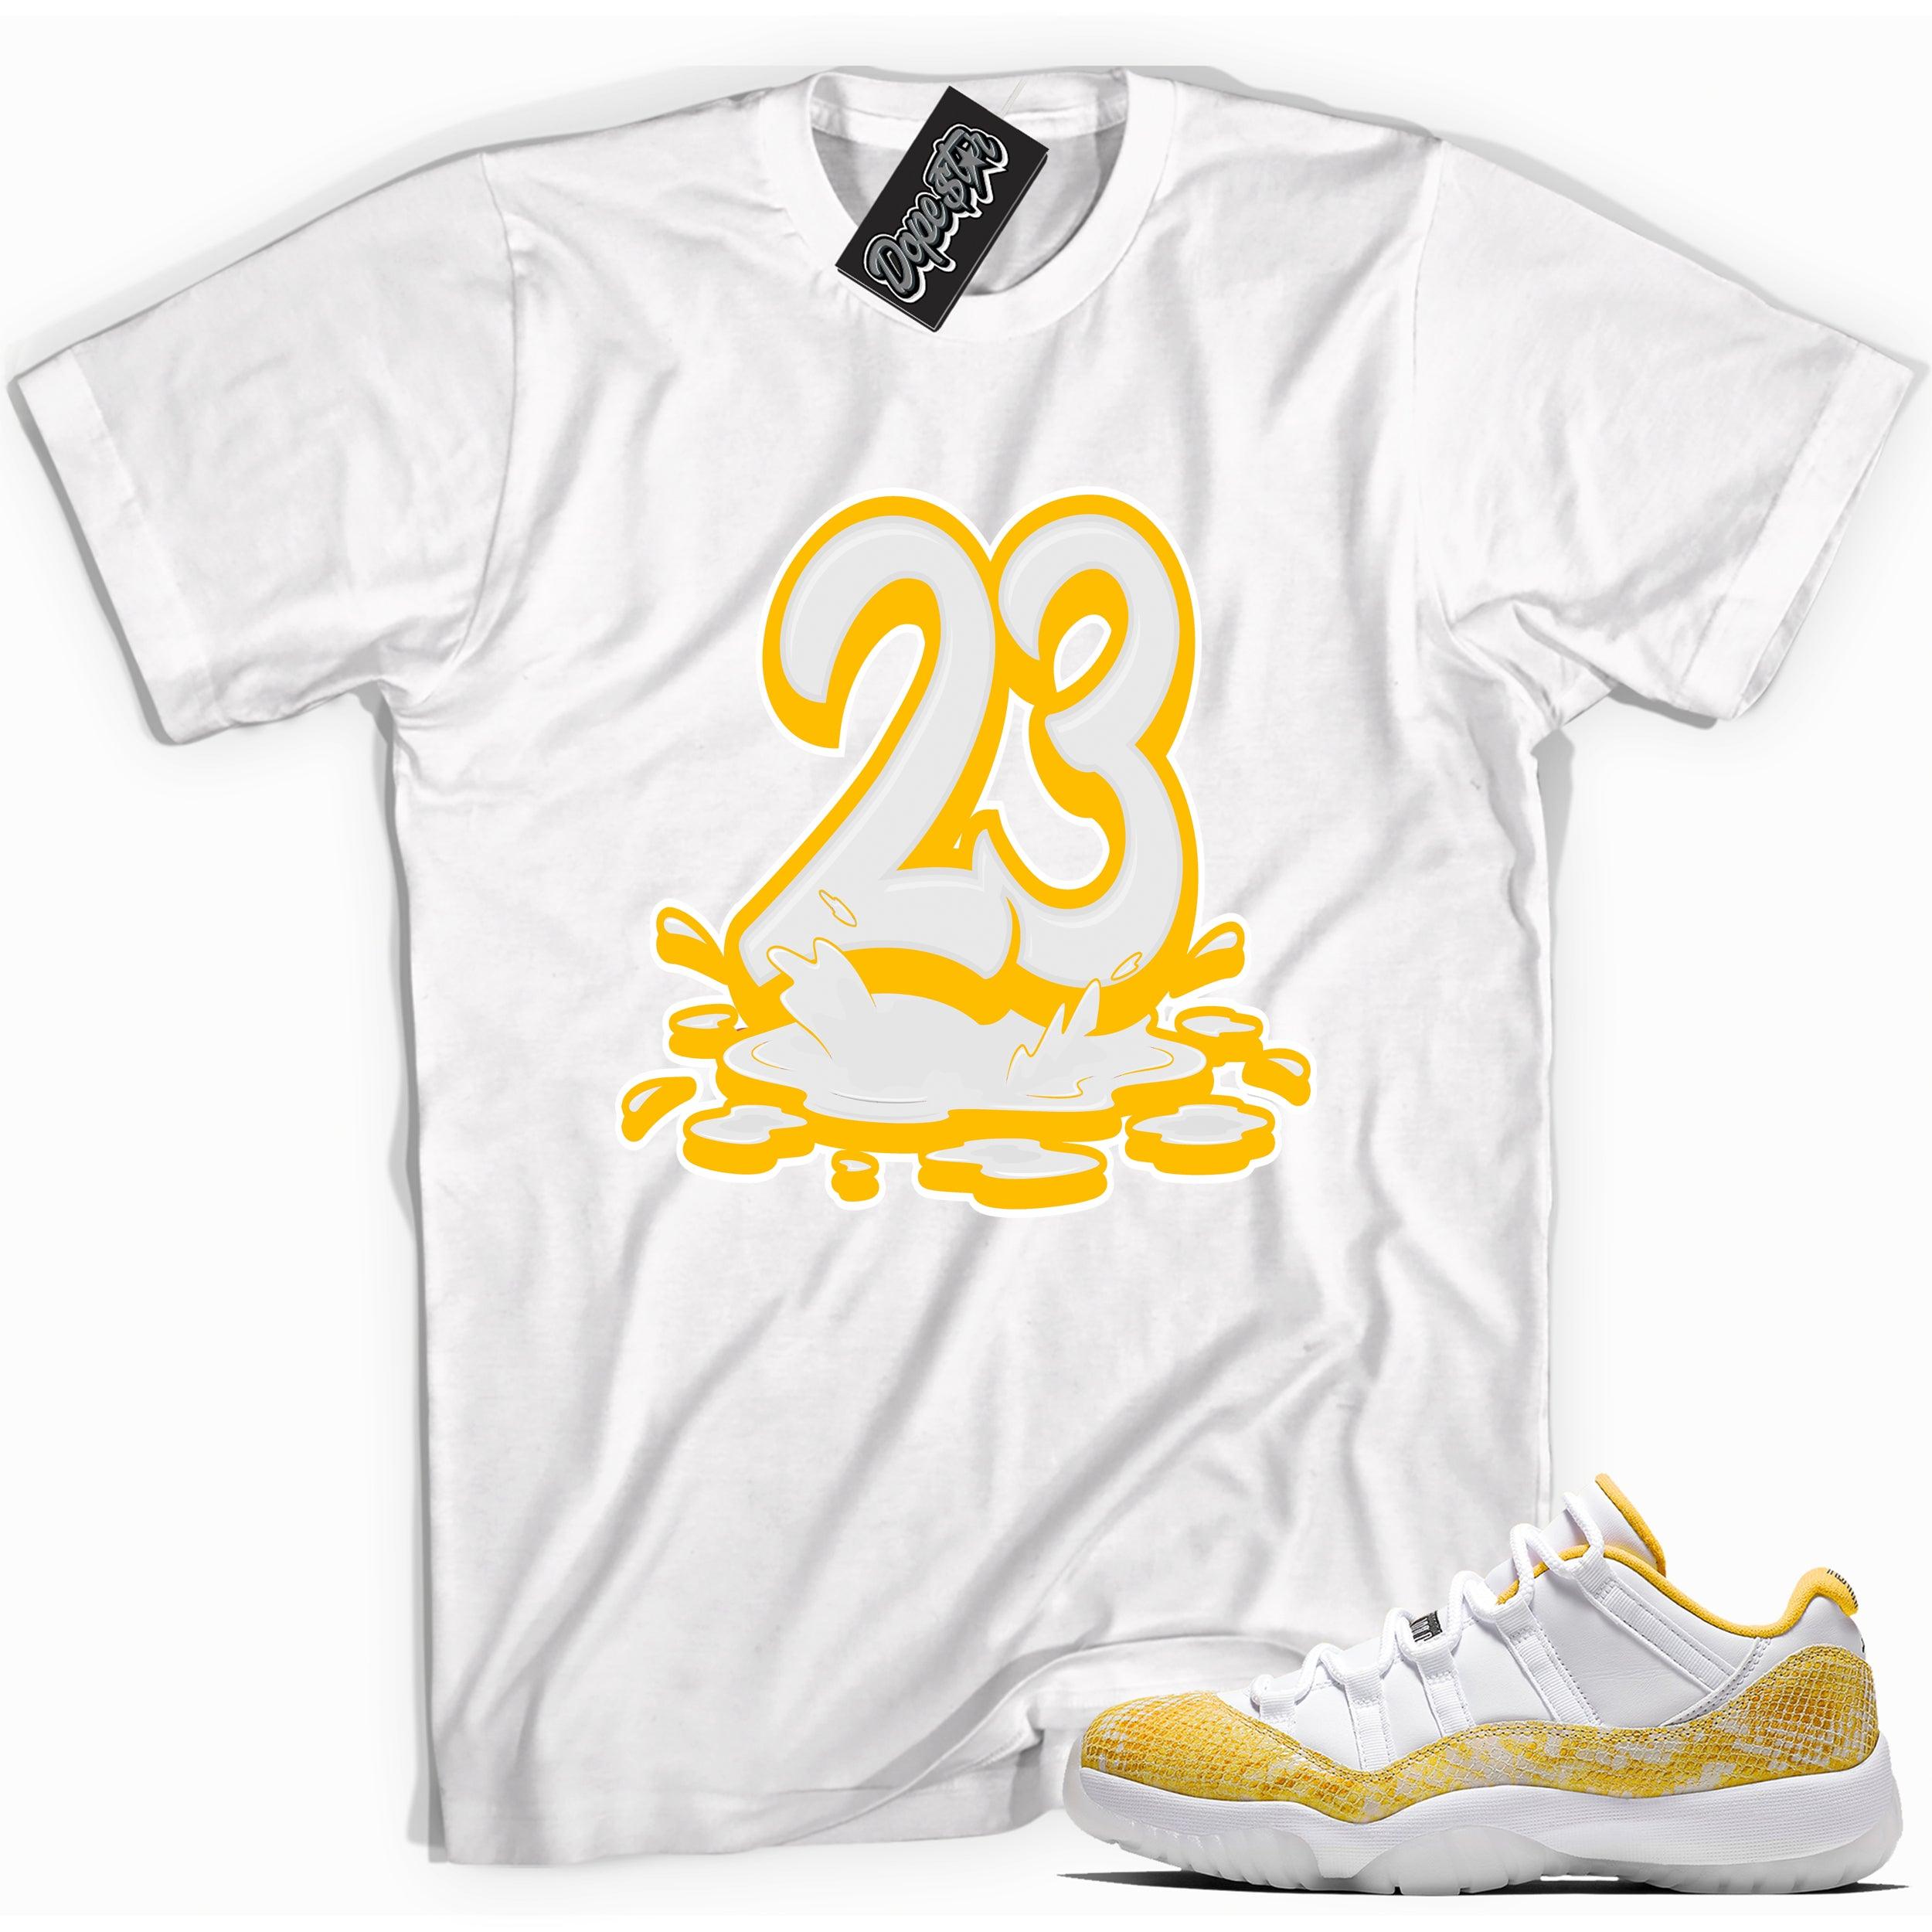 Cool white graphic tee with '23 melting' print, that perfectly matches Air Jordan 11 Low Yellow Snakeskin sneakers